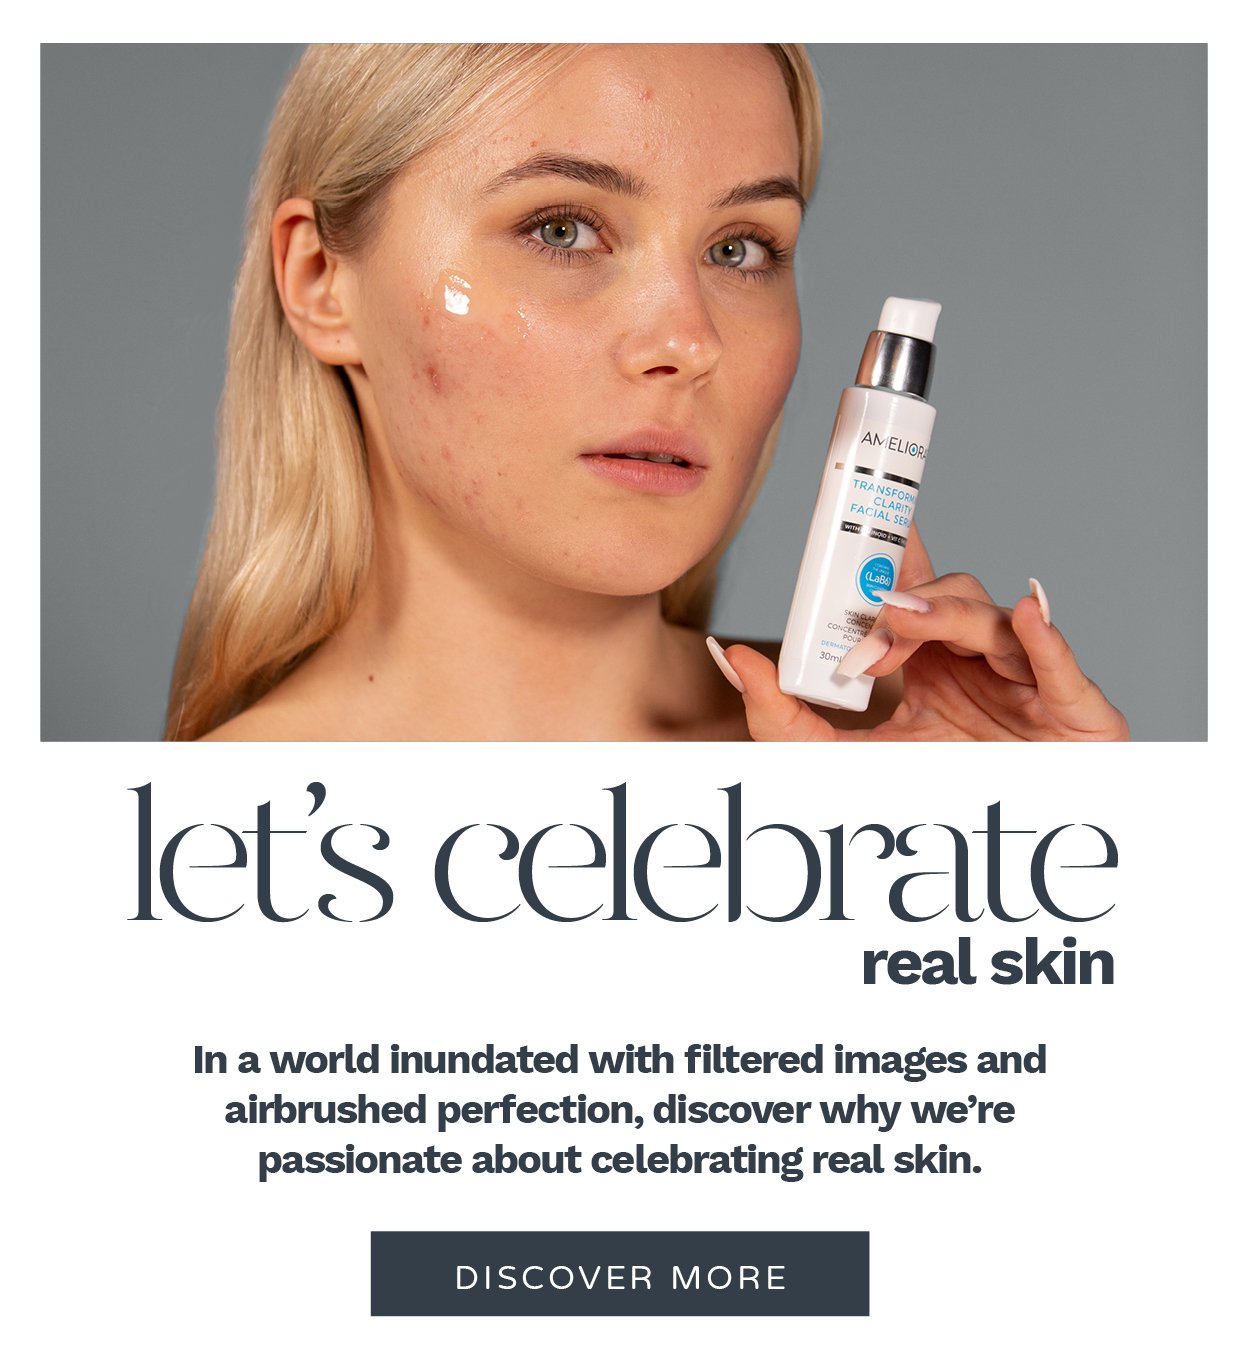 Discover why we are passionate about celebrating real skin